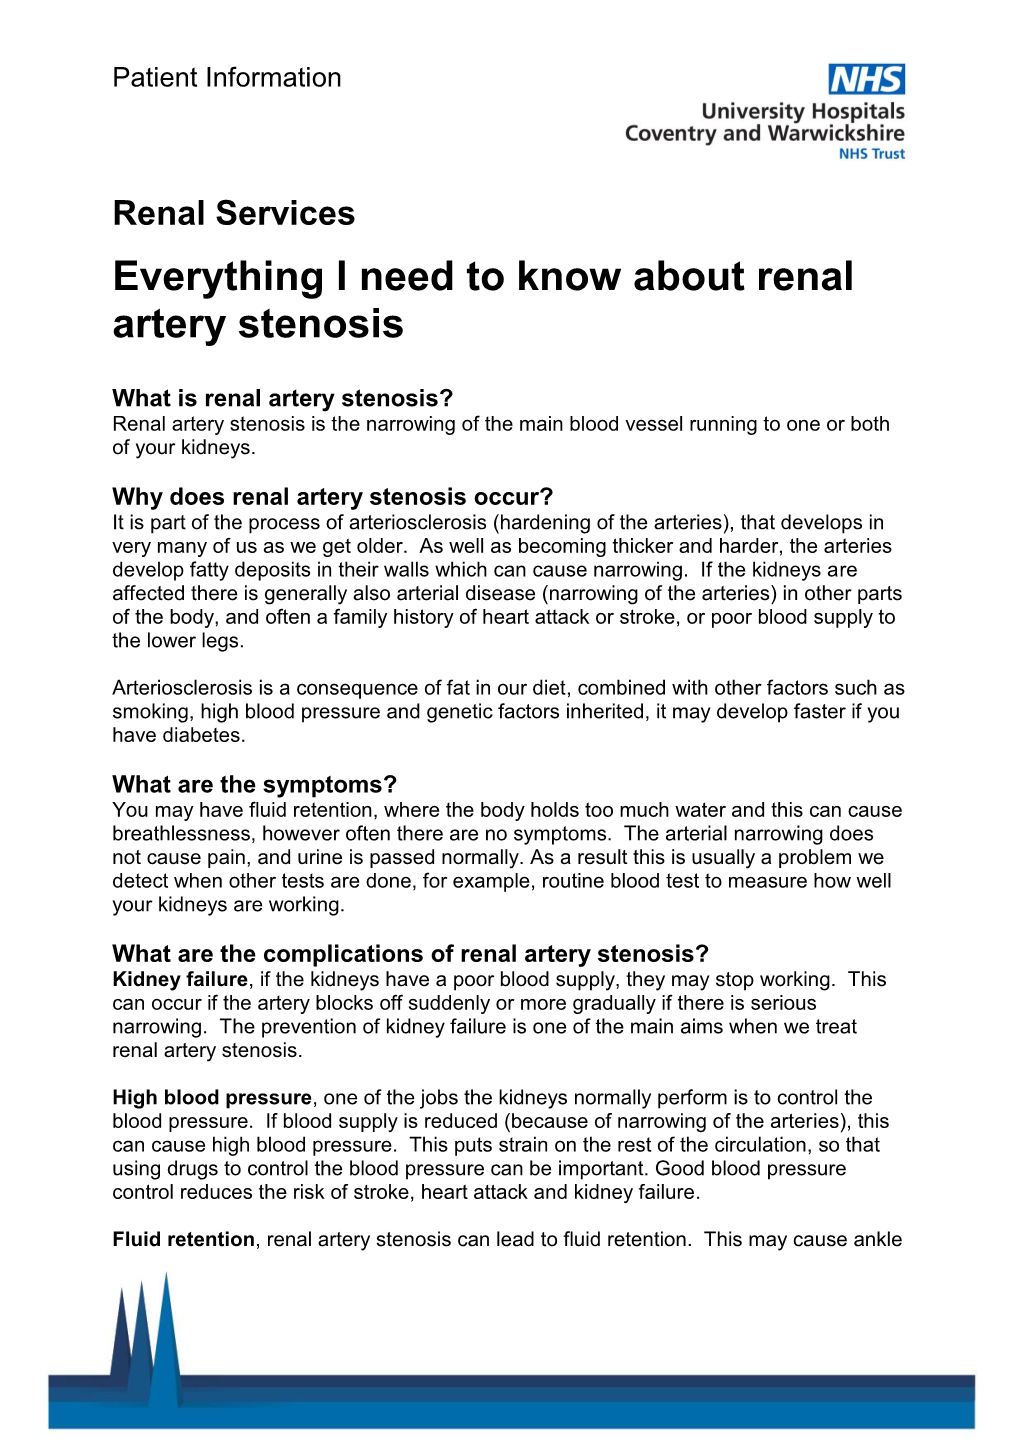 Everything I Need to Know About Renal Artery Stenosis